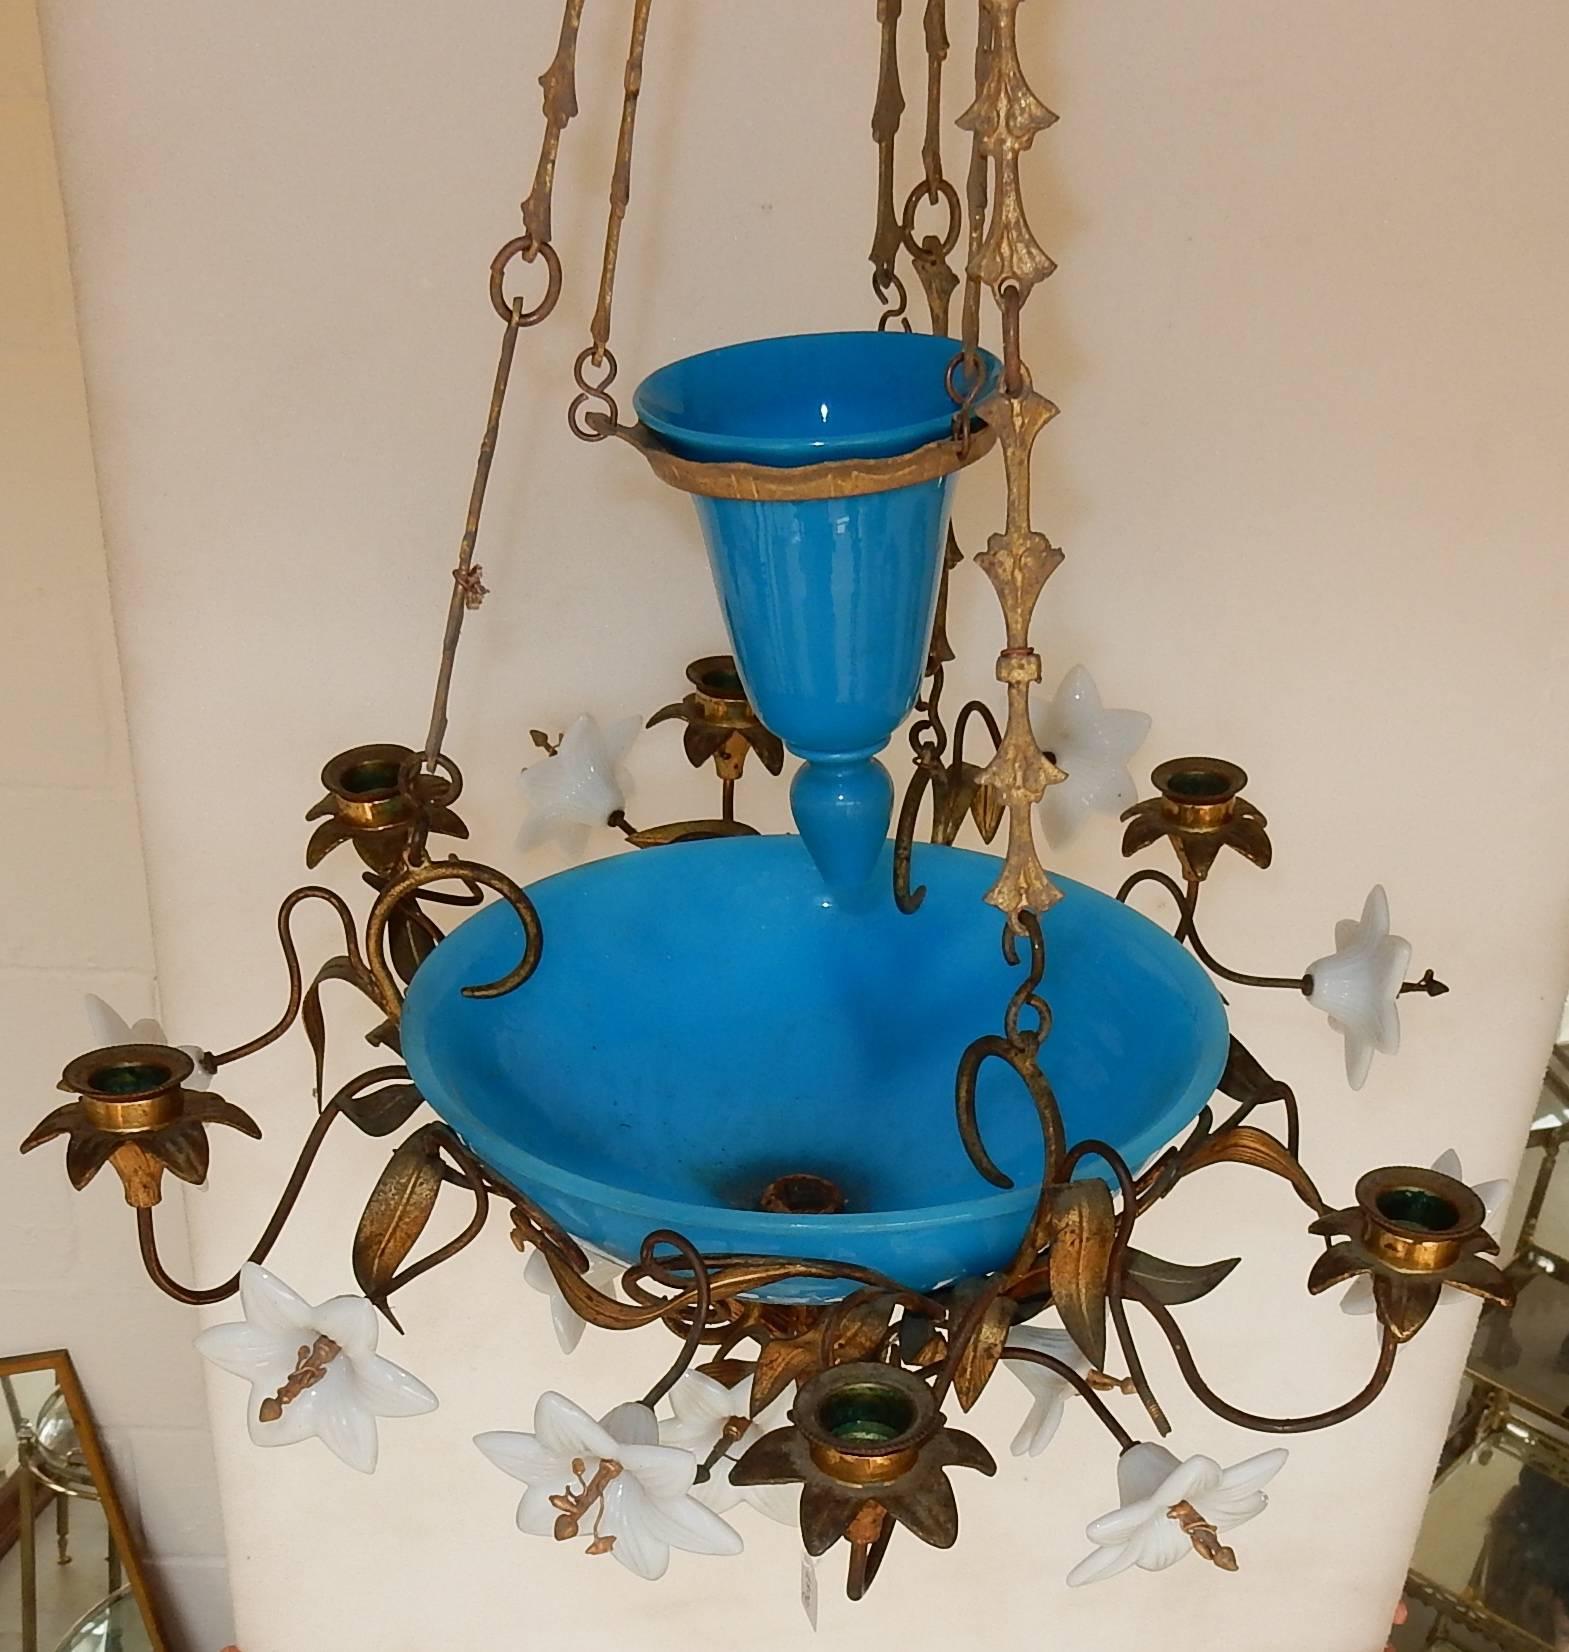 Chandelier in bindweeds with bowl in opaline blue and flowers in opaline white, frame brass and bronze, six candlesticks, condition of use, circa 1880-1900.